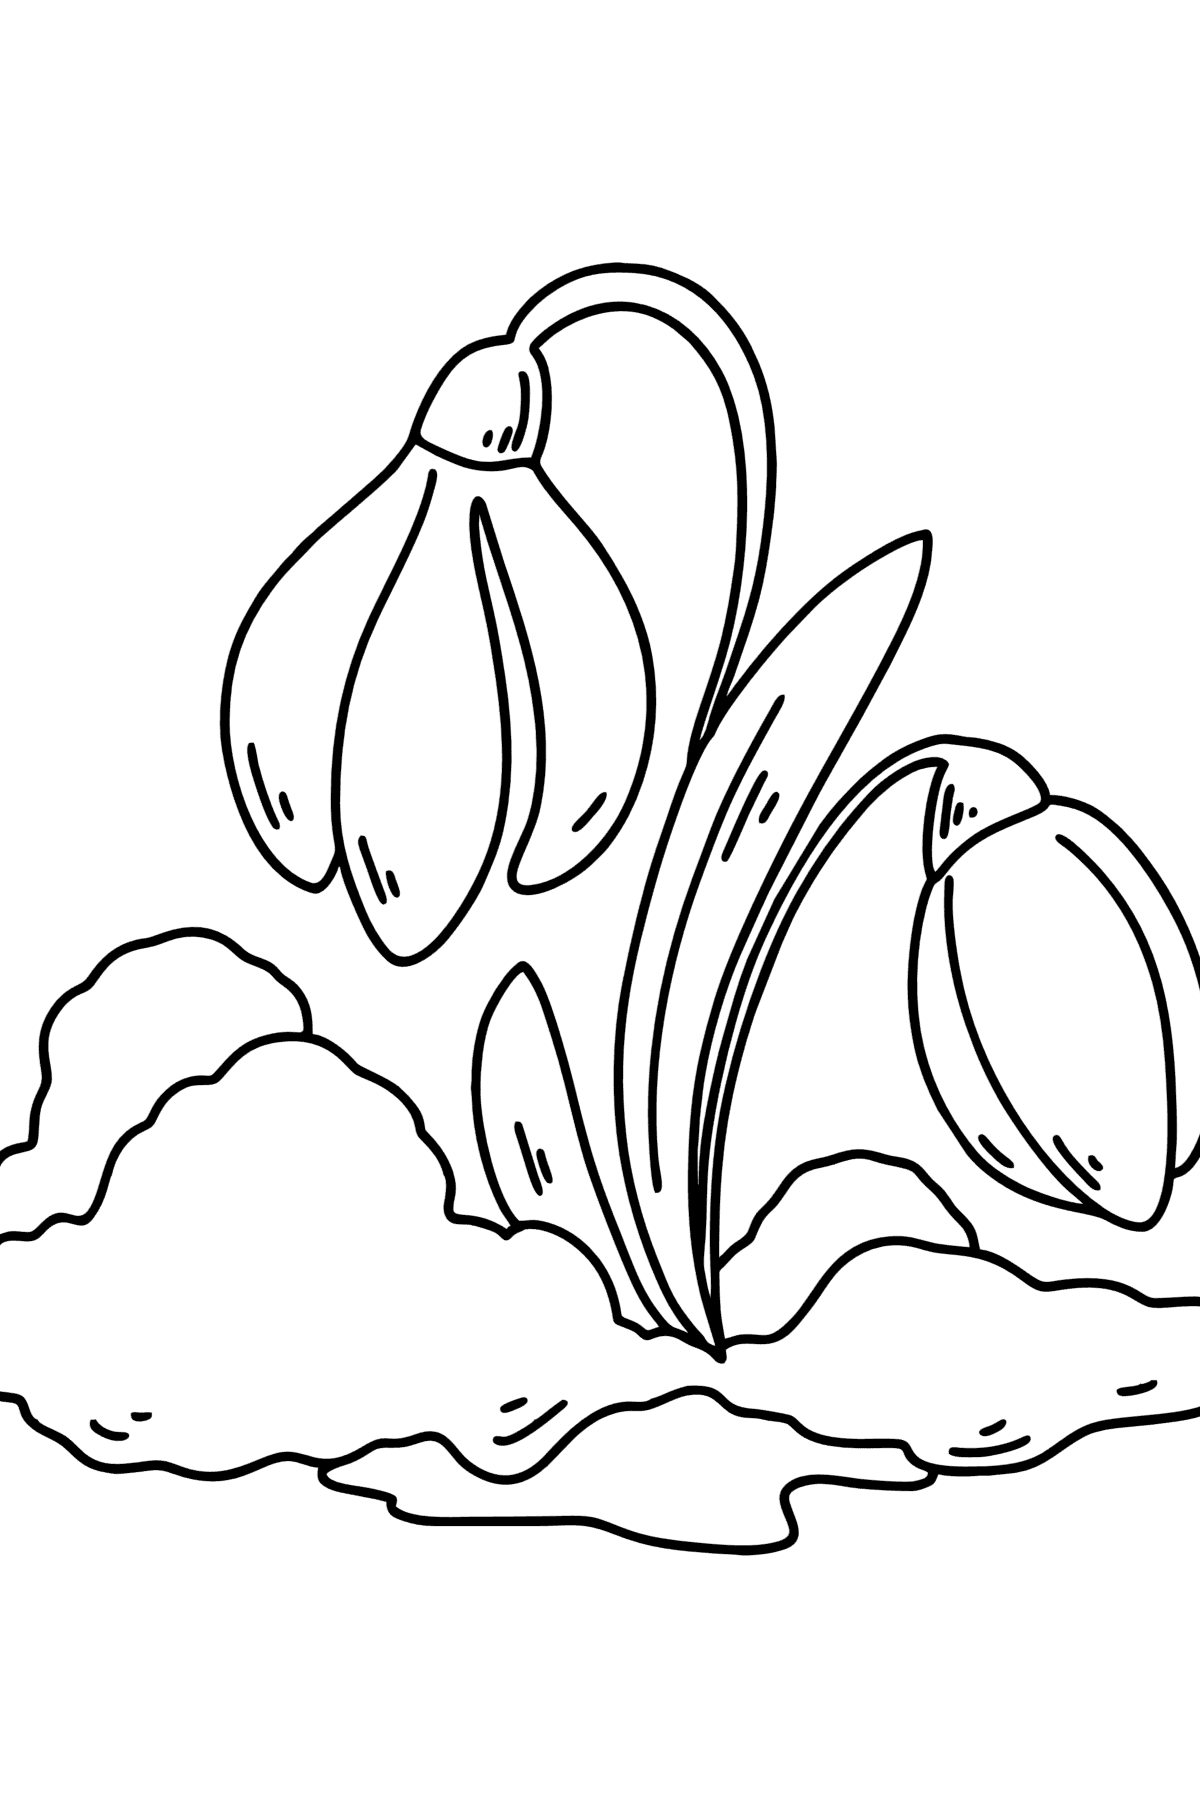 Spring Snowdrops coloring page - Coloring Pages for Kids